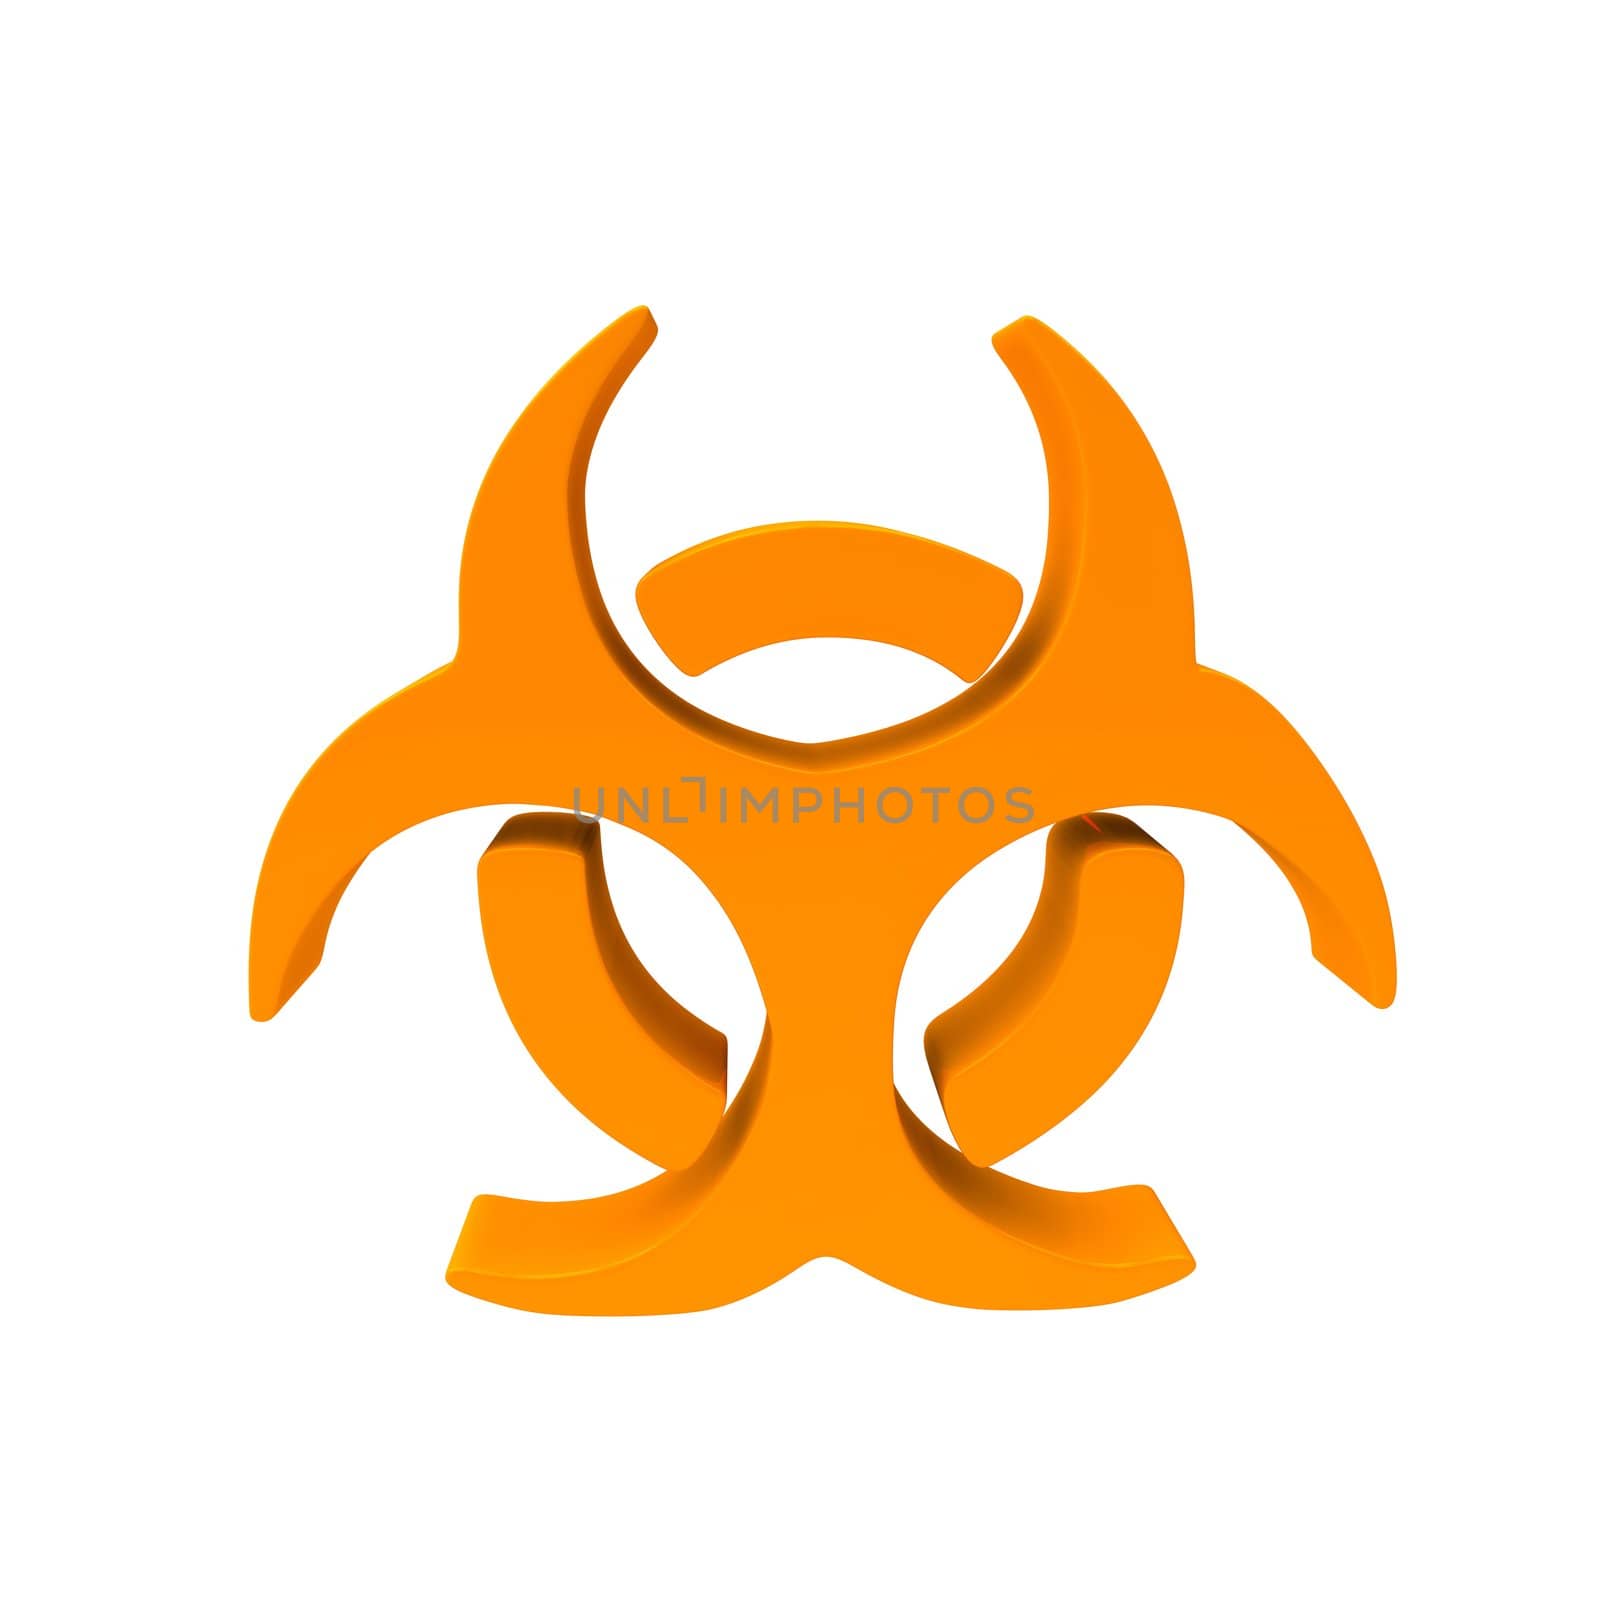 Virus icon as an icon warns unsuspecting people from the danger of biological weapons